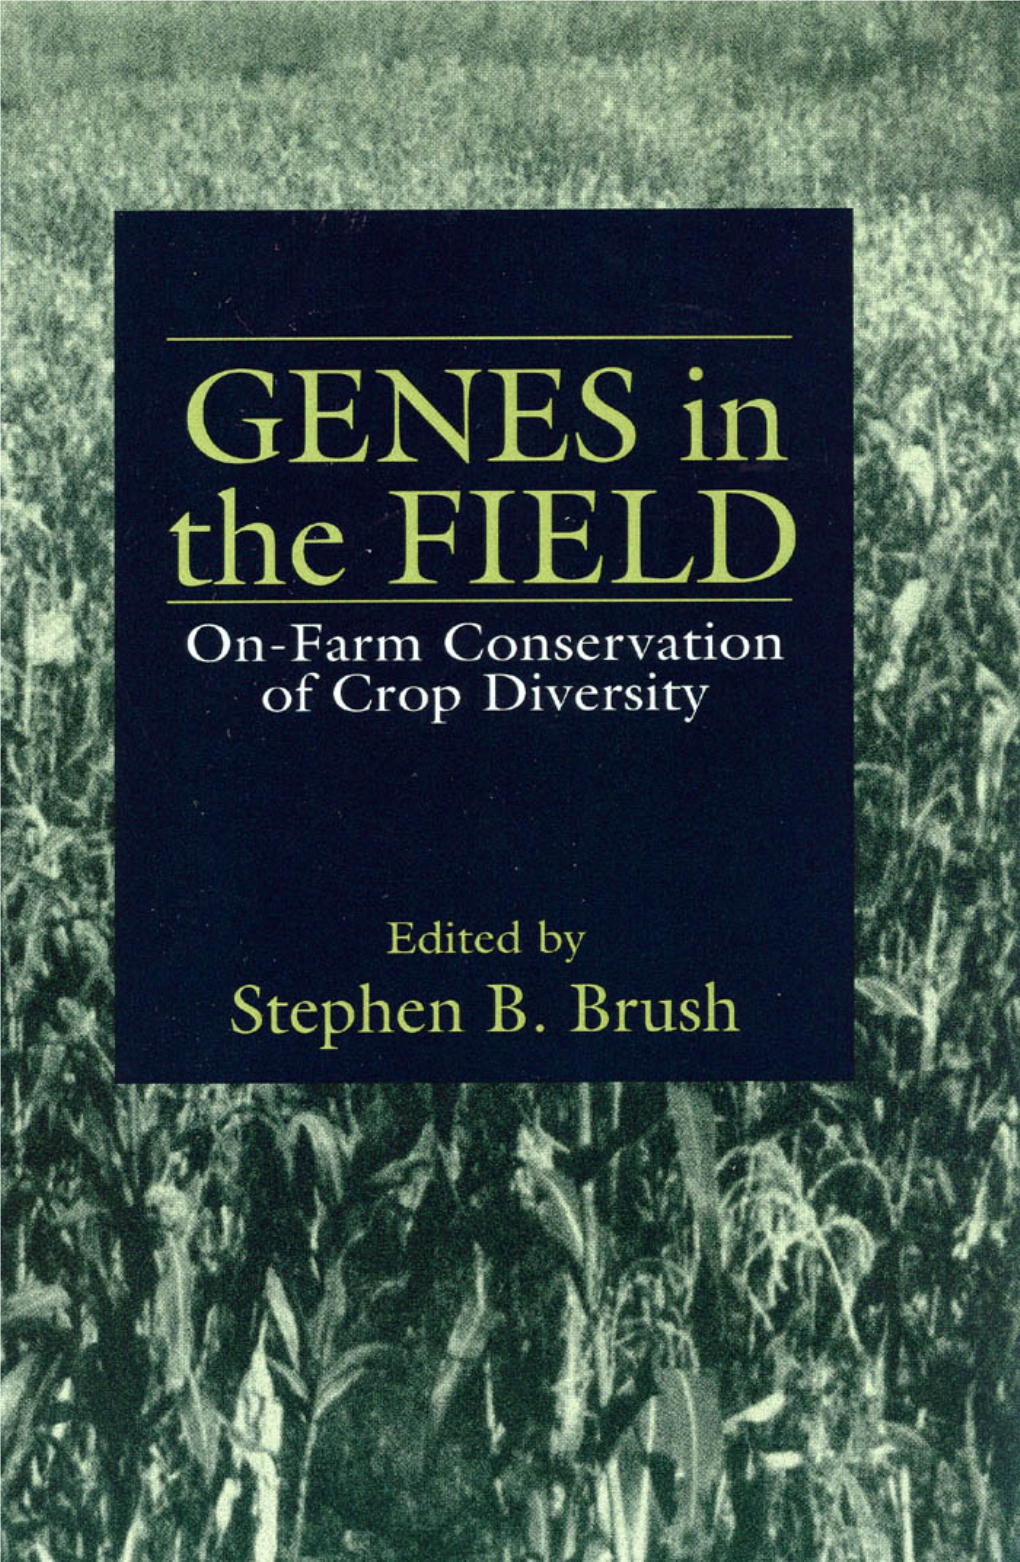 Bon-Farm Conservation of Crop Diversity This Page Intentionally Left Blank GENES in the FIELD On-Farm Conservation of Crop Diversity